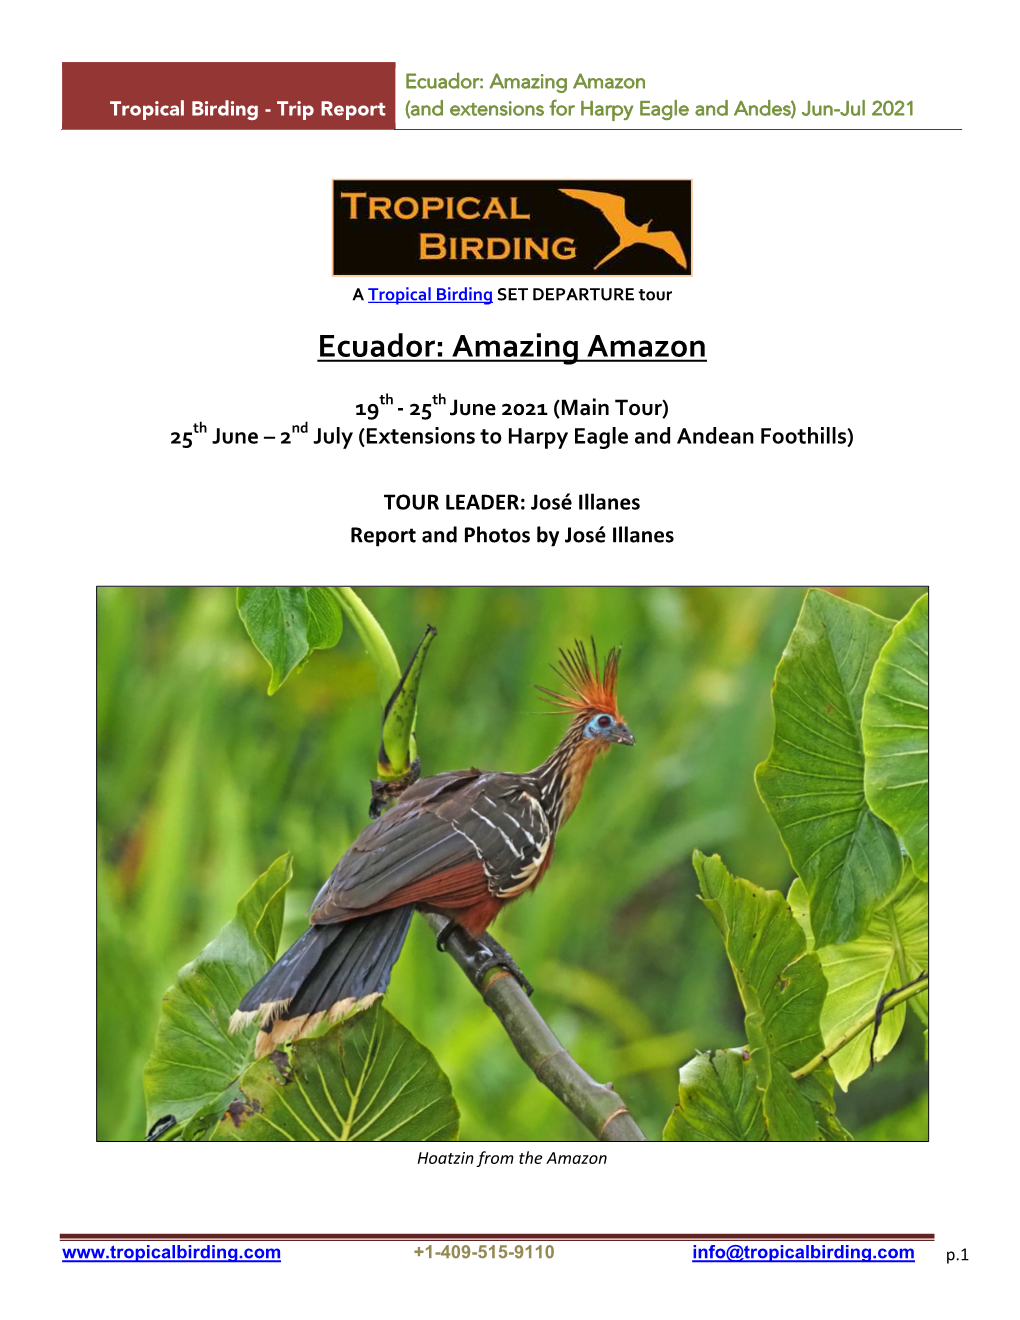 Ecuador: Amazing Amazon Tropical Birding - Trip Report (And Extensions for Harpy Eagle and Andes) Jun-Jul 2021